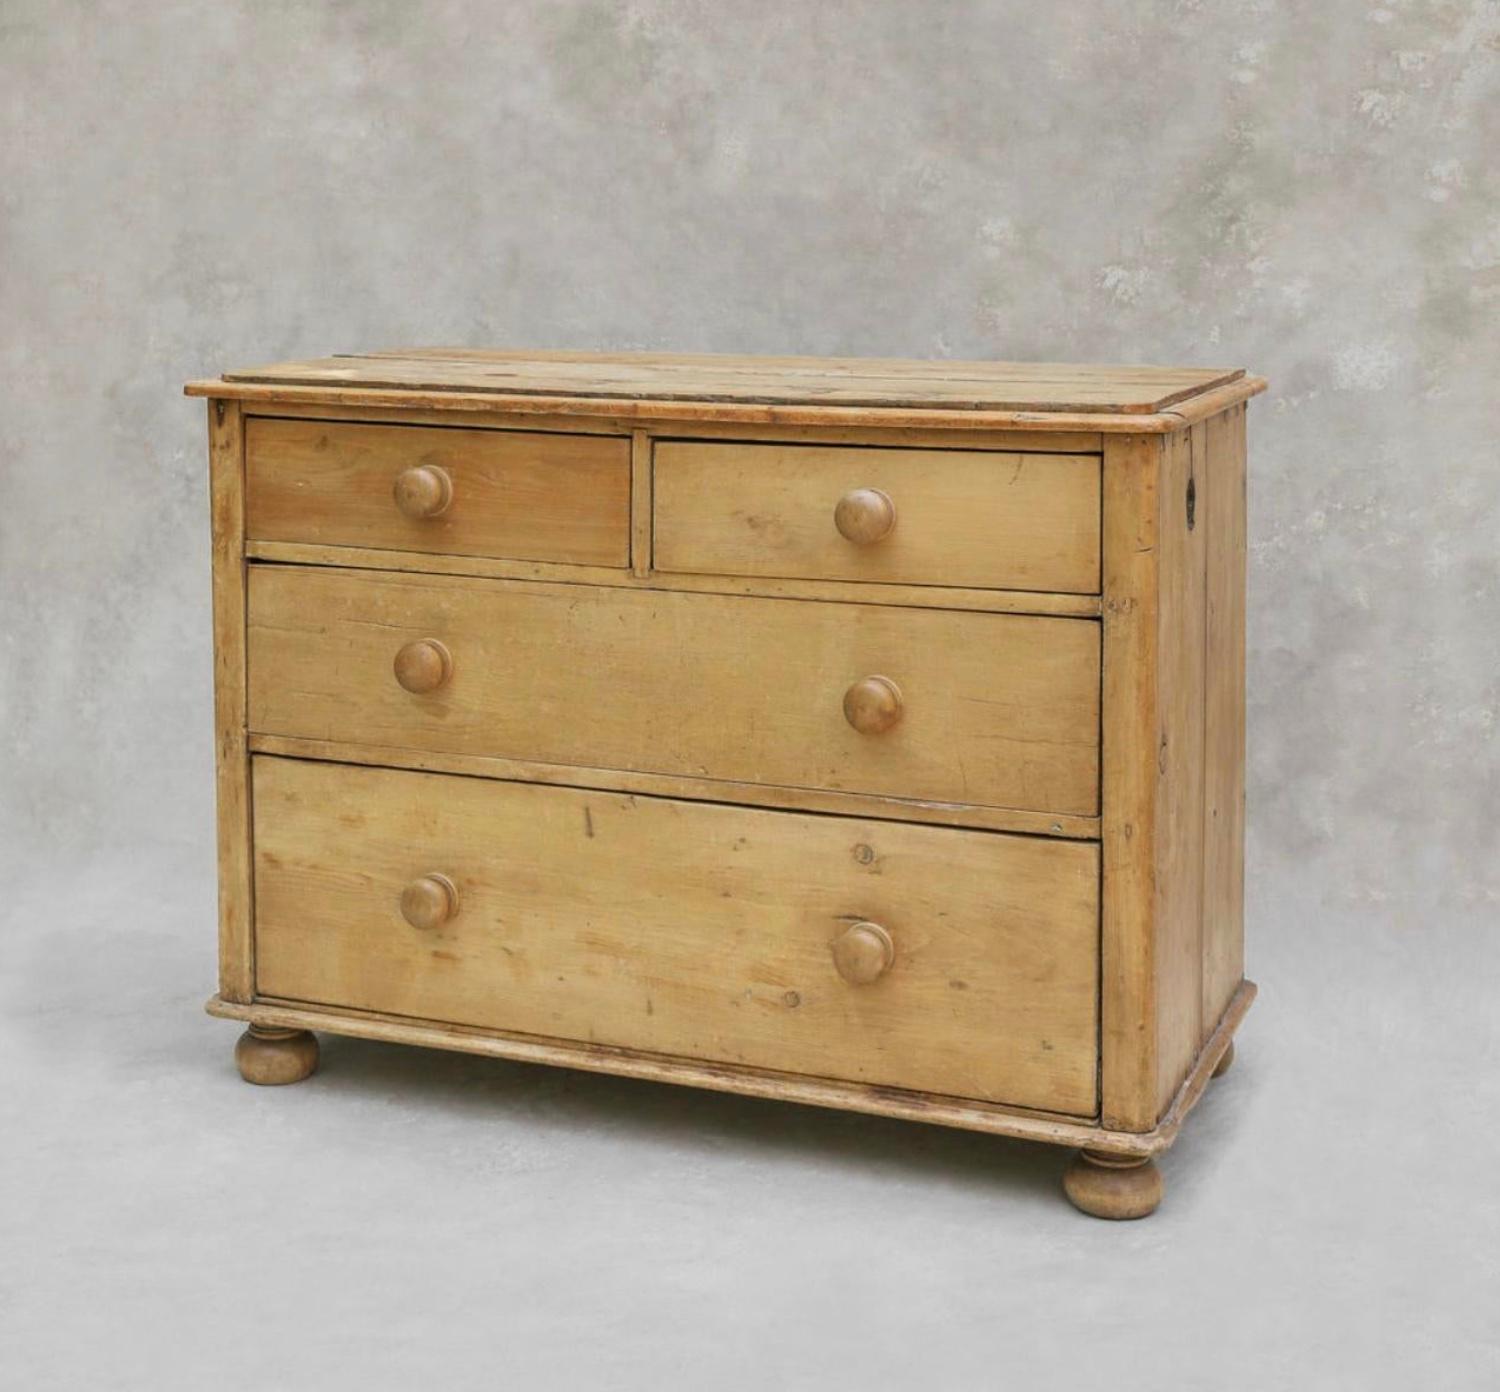 Beautifully toned, Vintage Victorian Era, English Pine 2 over 2 Chest of Drawers. We love this piece styled as a dresser, nightstand, or storage cabinet in an entryway or living space between 2 windows. Typical antique weathering of wood. Hollowed